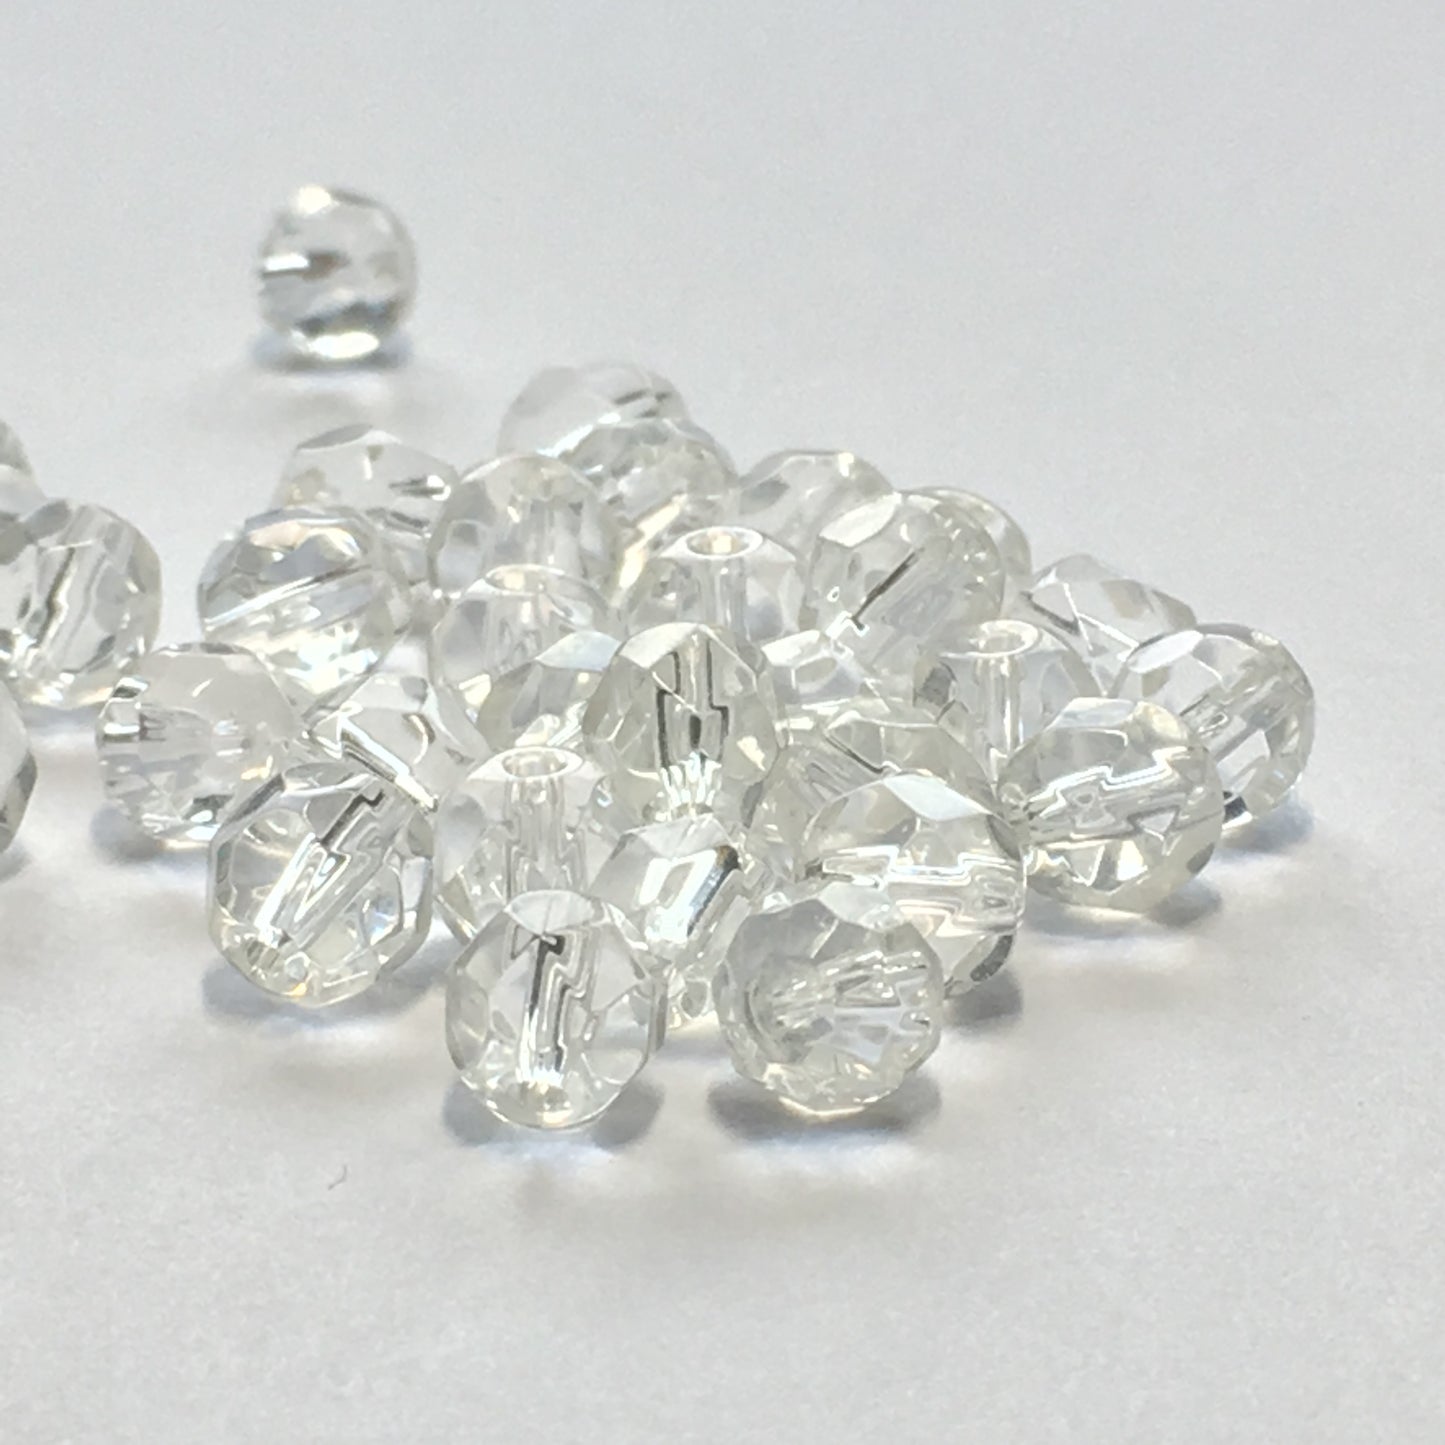 Clear Glass Faceted Round Beads, 6 mm, 31 Beads